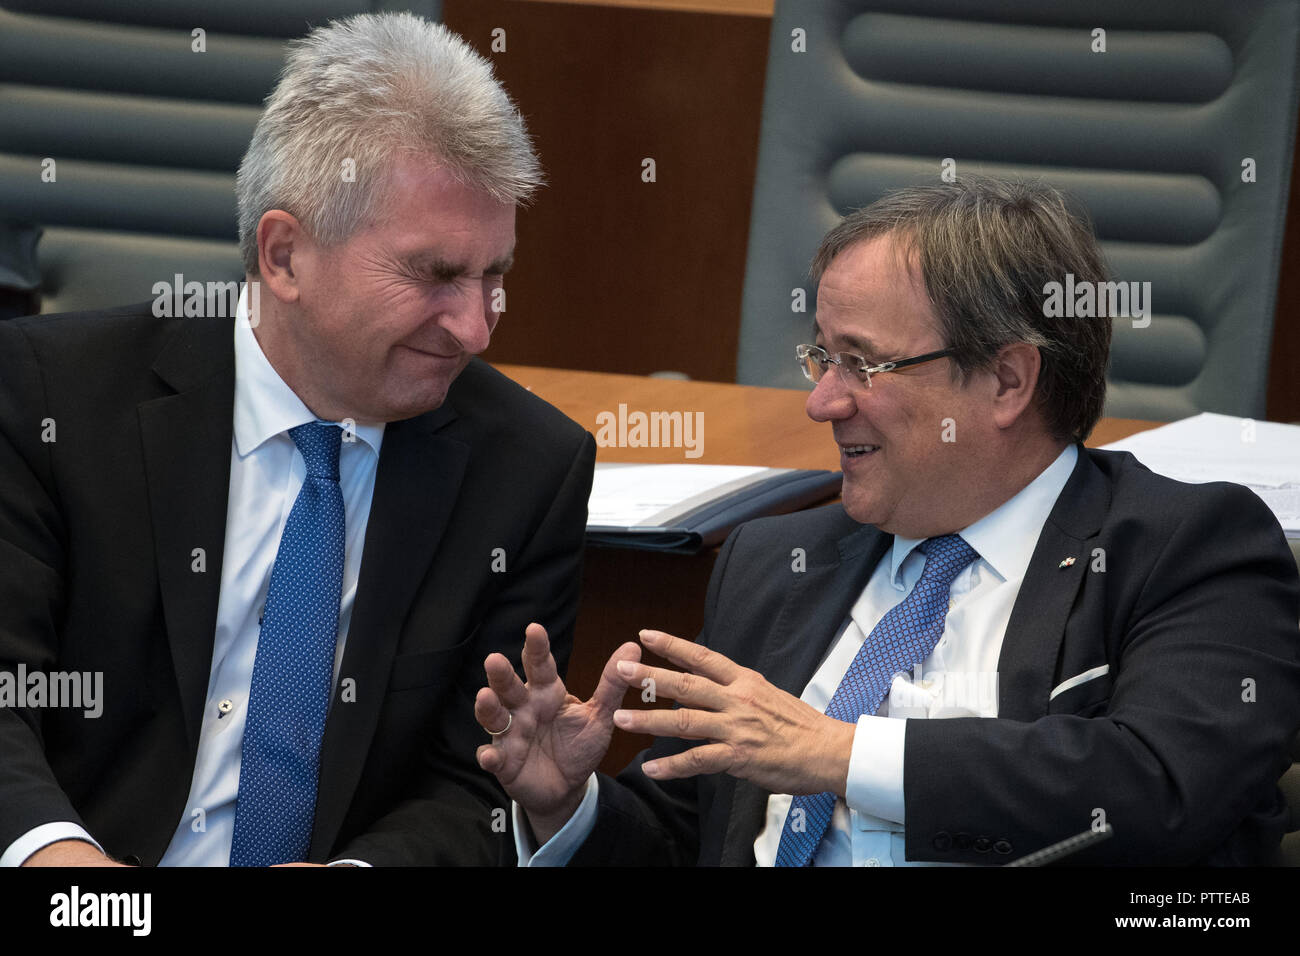 11 October 2018, North Rhine-Westphalia, Duesseldorf: Armin Laschet (CDU, r), Minister President of the State of North Rhine-Westphalia, and Andreas Pinkwart (FDP), Minister of Economic Affairs of the State of North Rhine-Westphalia, converse during the debate in the state parliament. The state parliament debated structural change and structural support in the Rhineland lignite mining area. Photo: Federico Gambarini/dpa Stock Photo